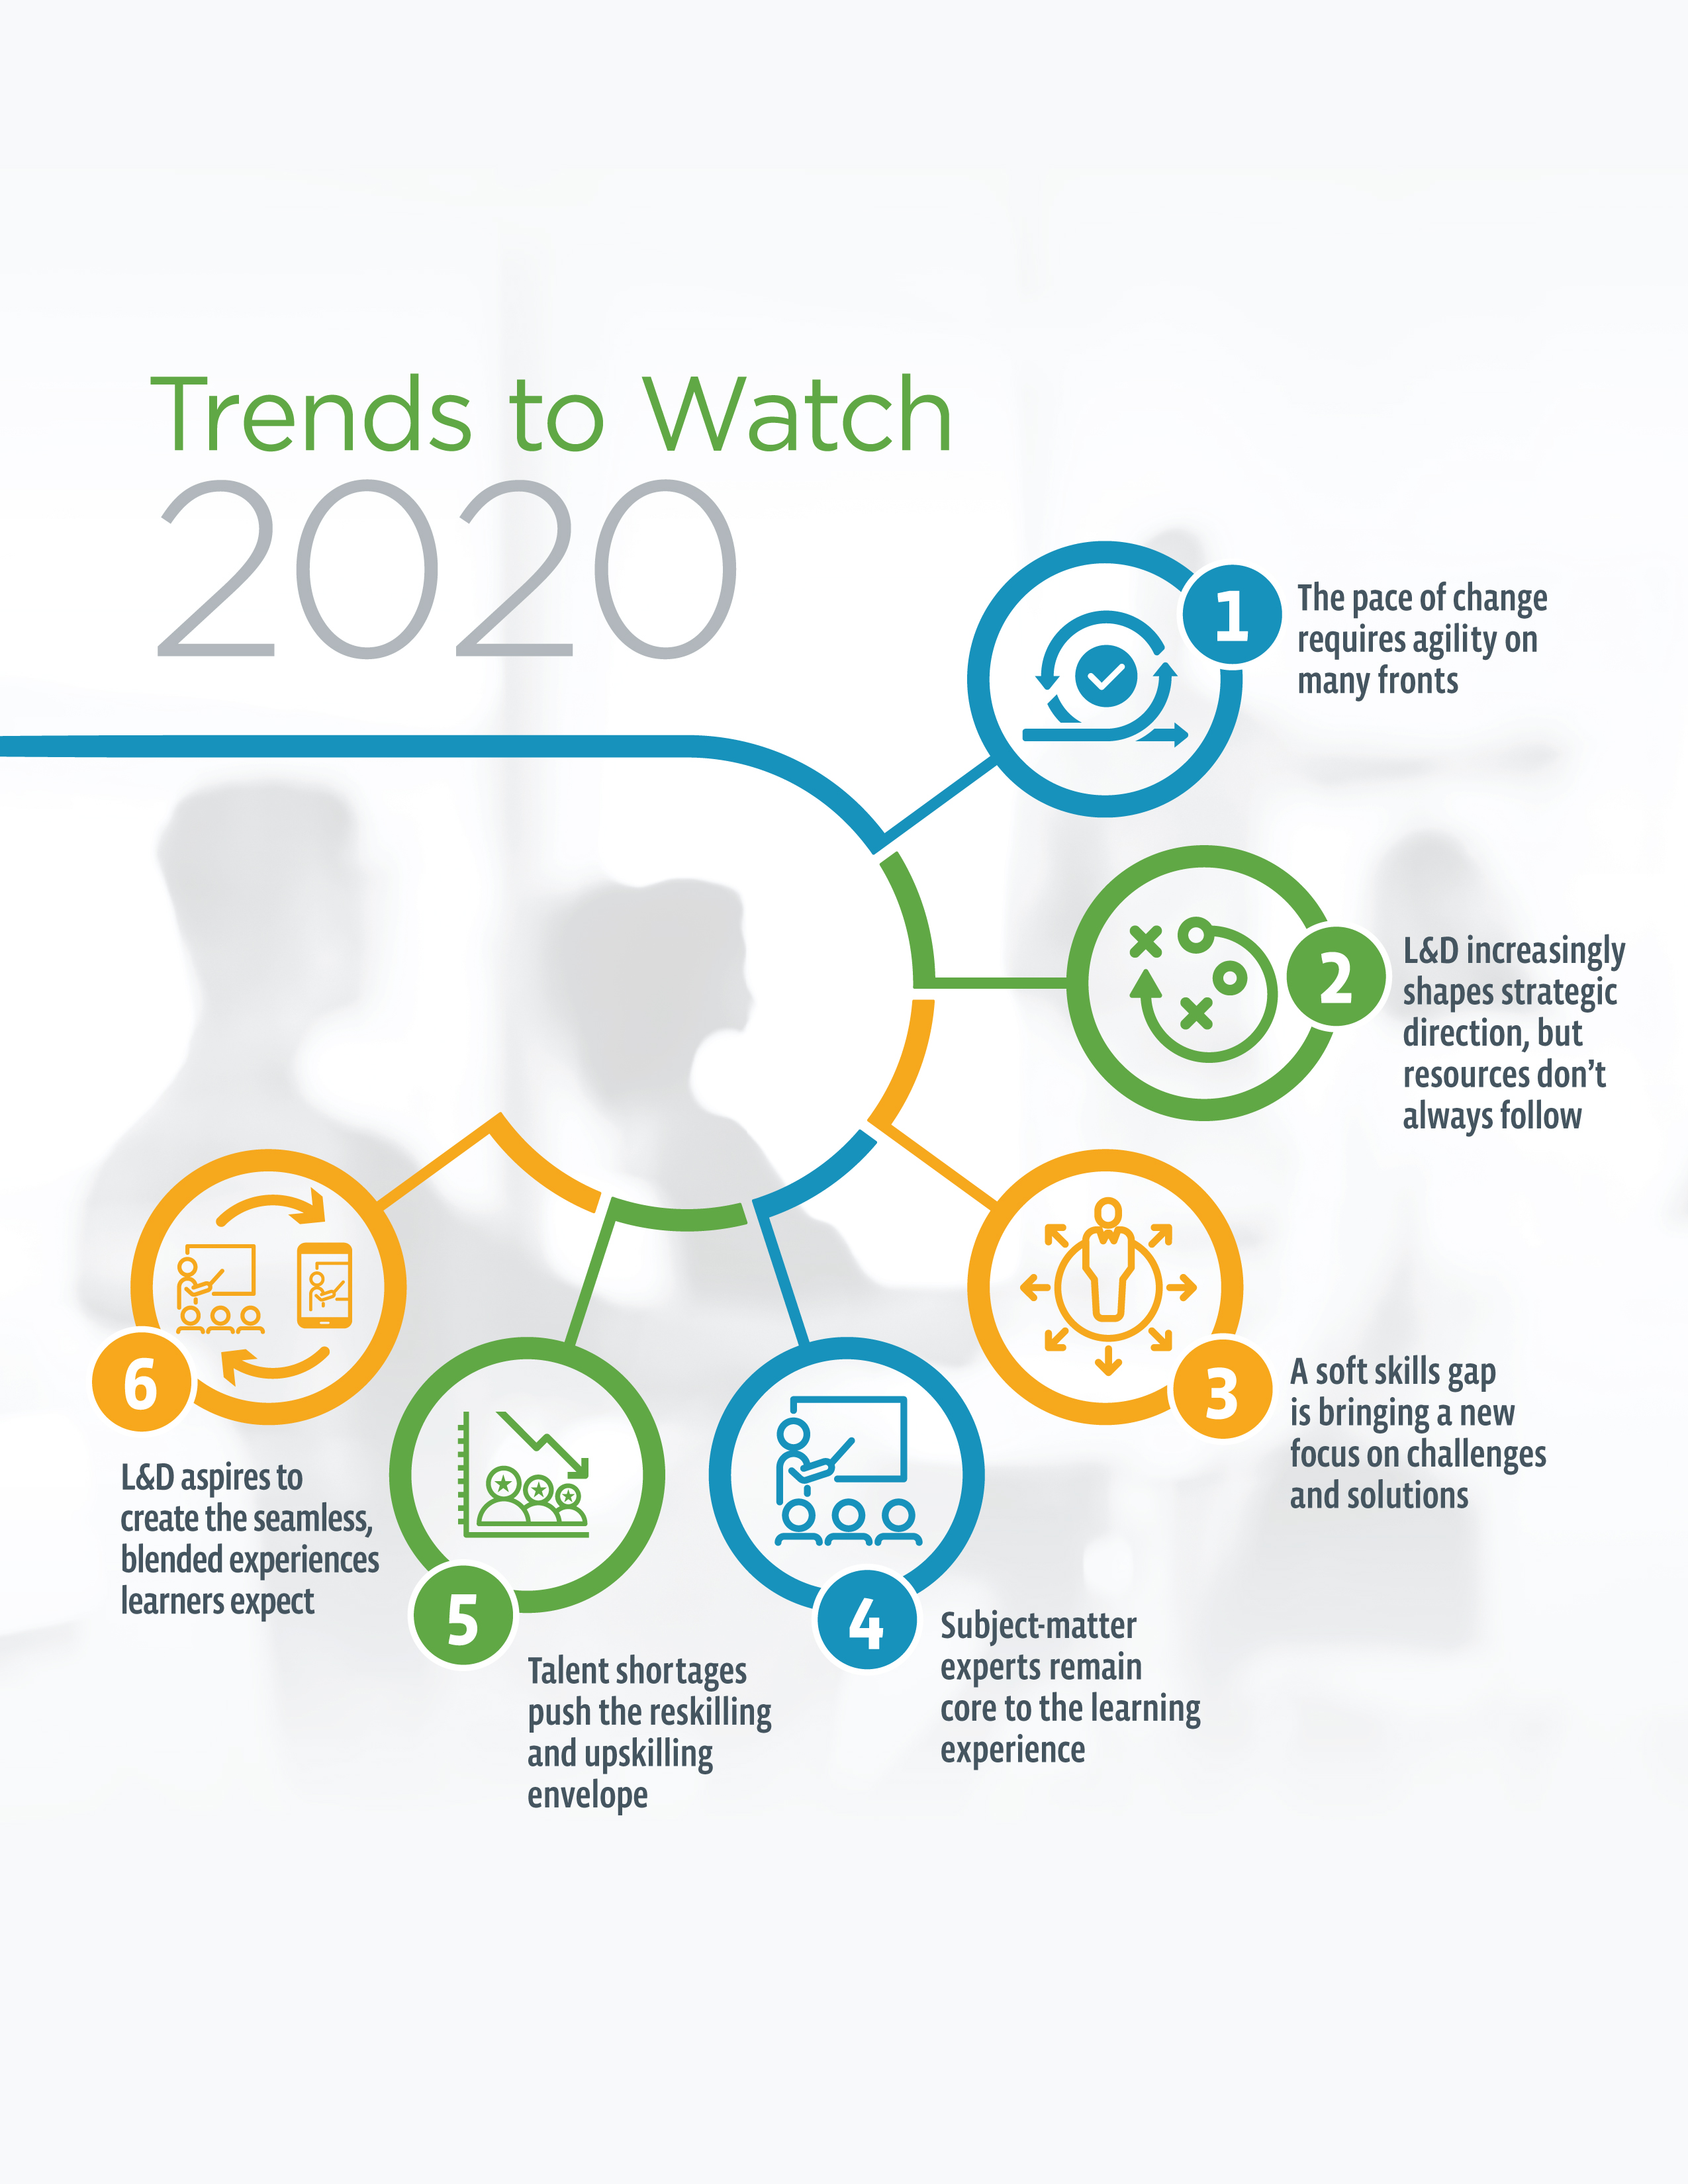 Trends to Watch 2020